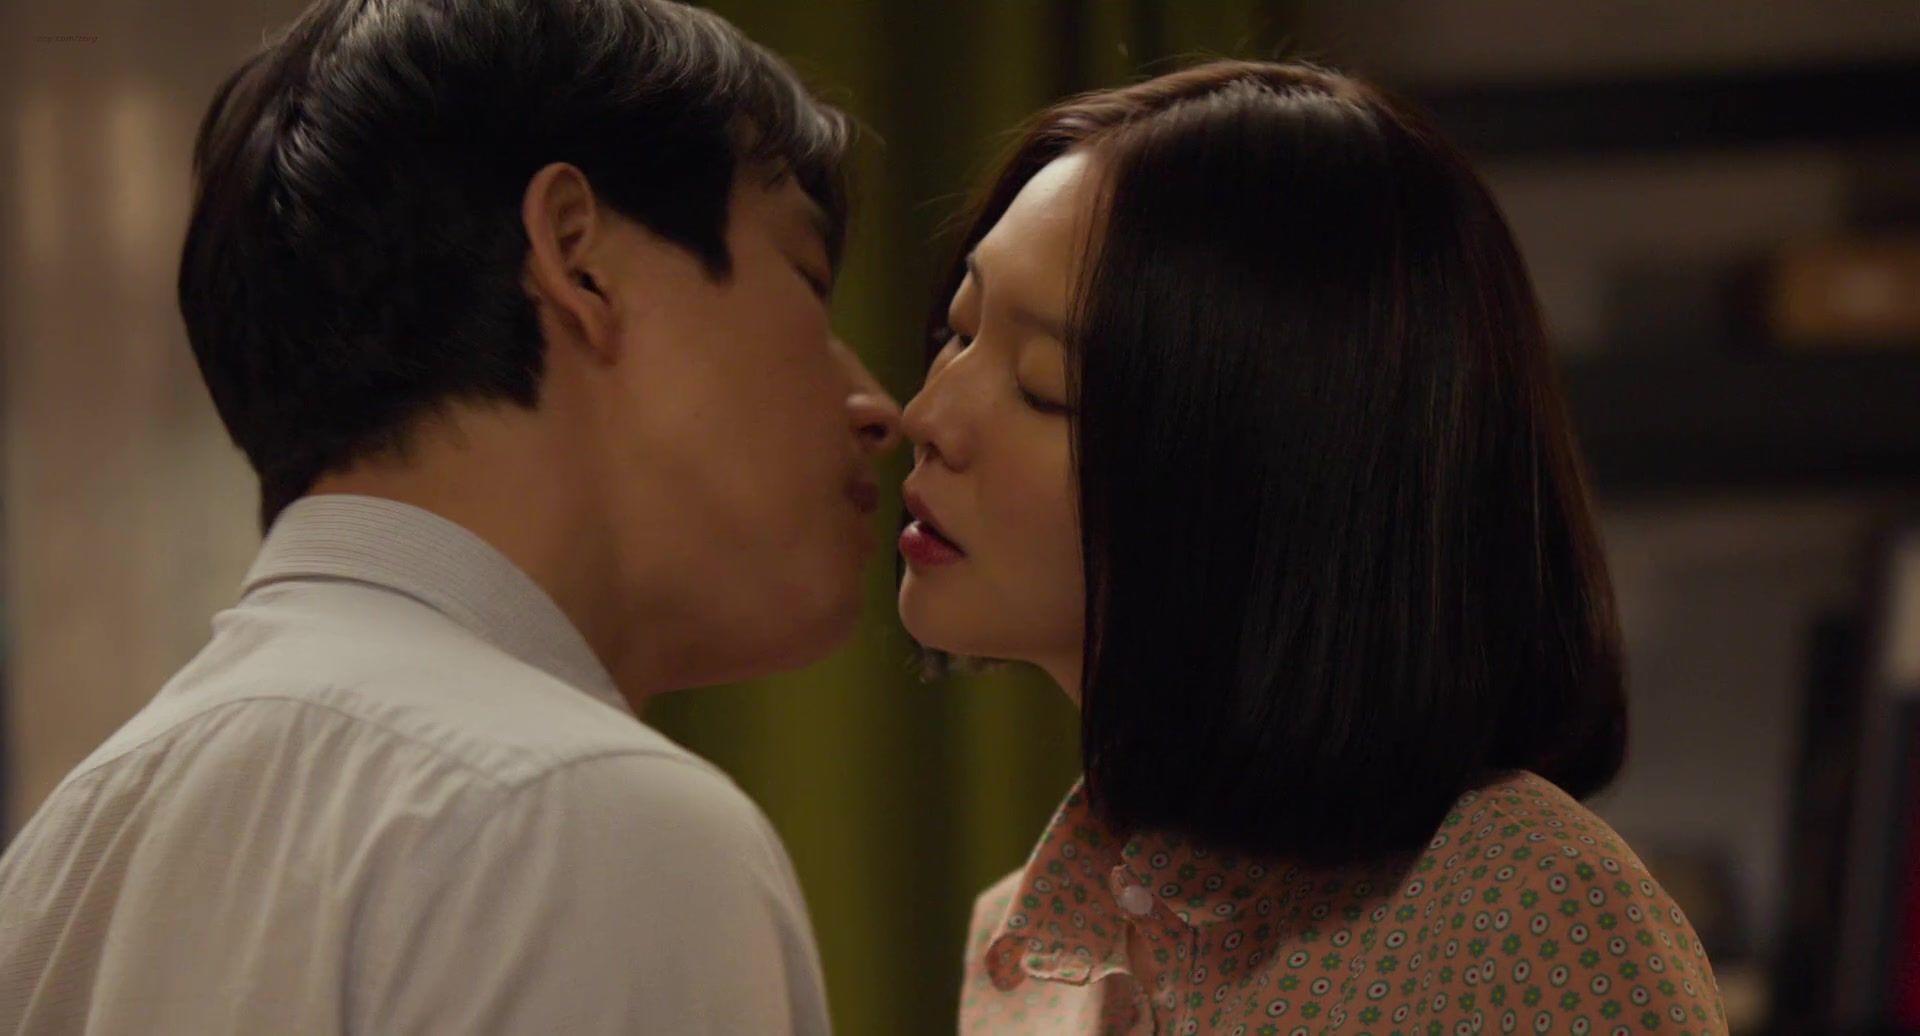 cFake Asian Celebs sex scenes | So-Young Park & Esom - Madam Ppang-Deok (2014) French - 2